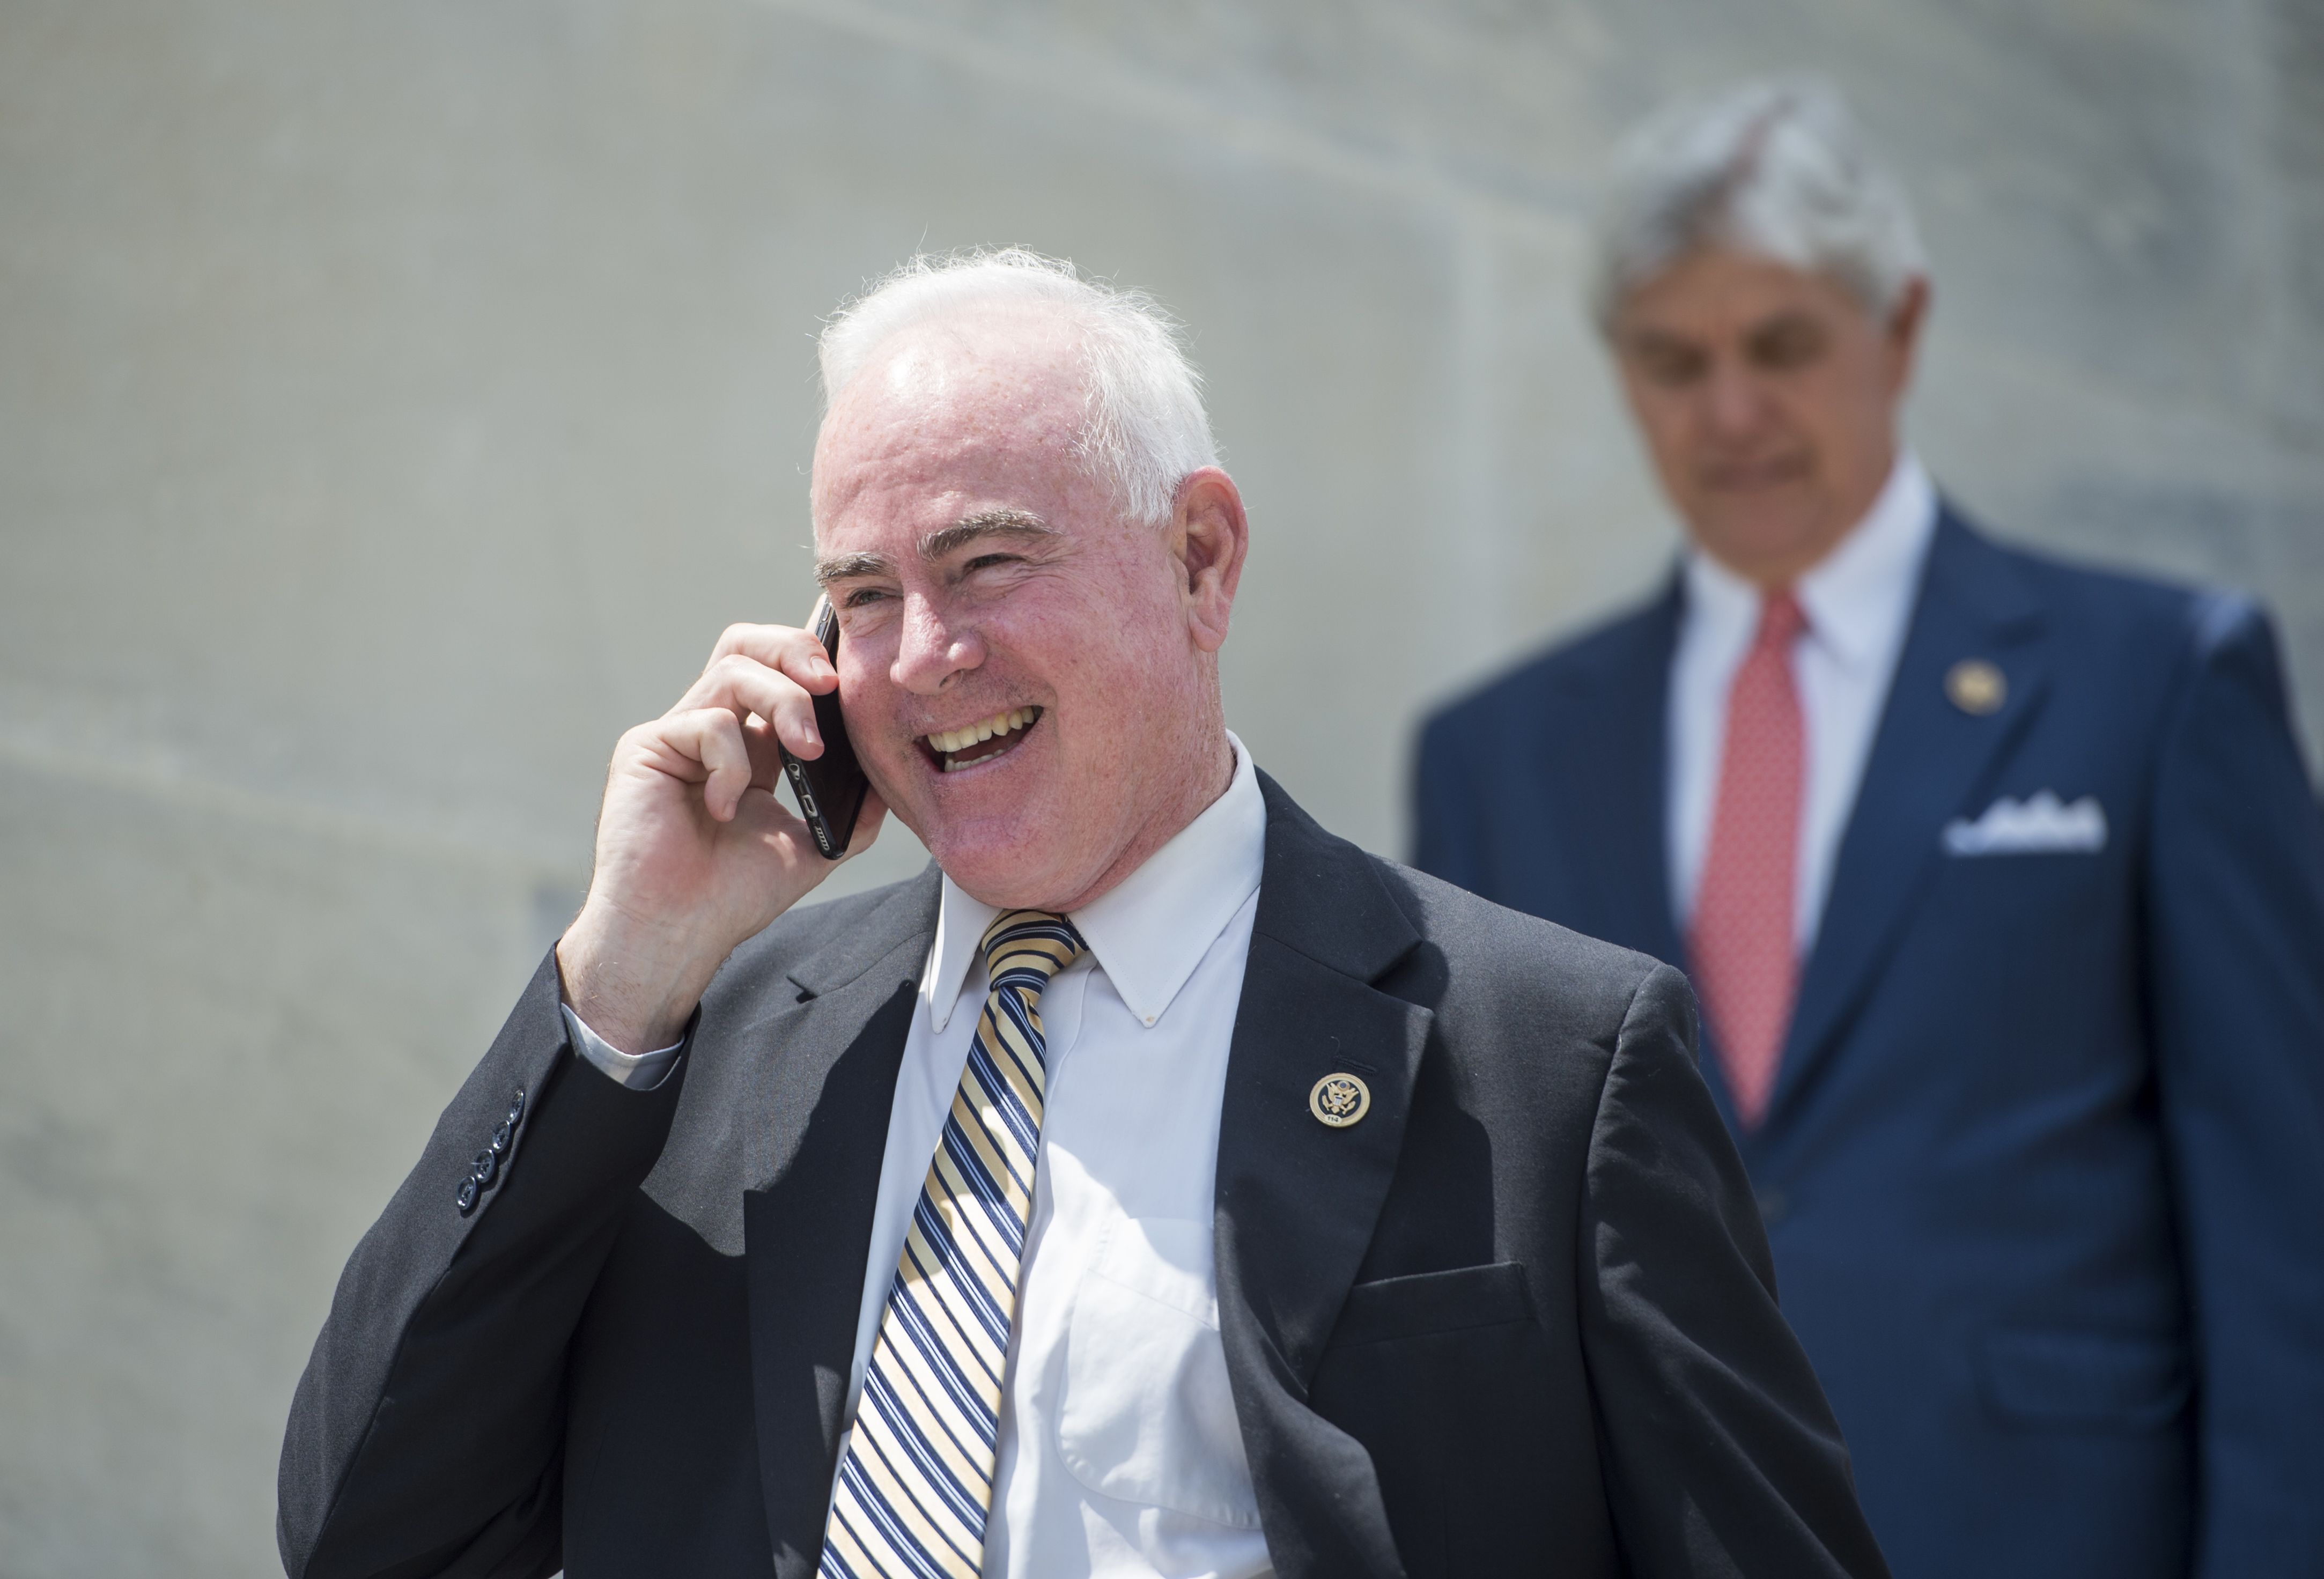 Rep. Pat Meehan resigns, will pay back $39,000 used for harassment  settlement